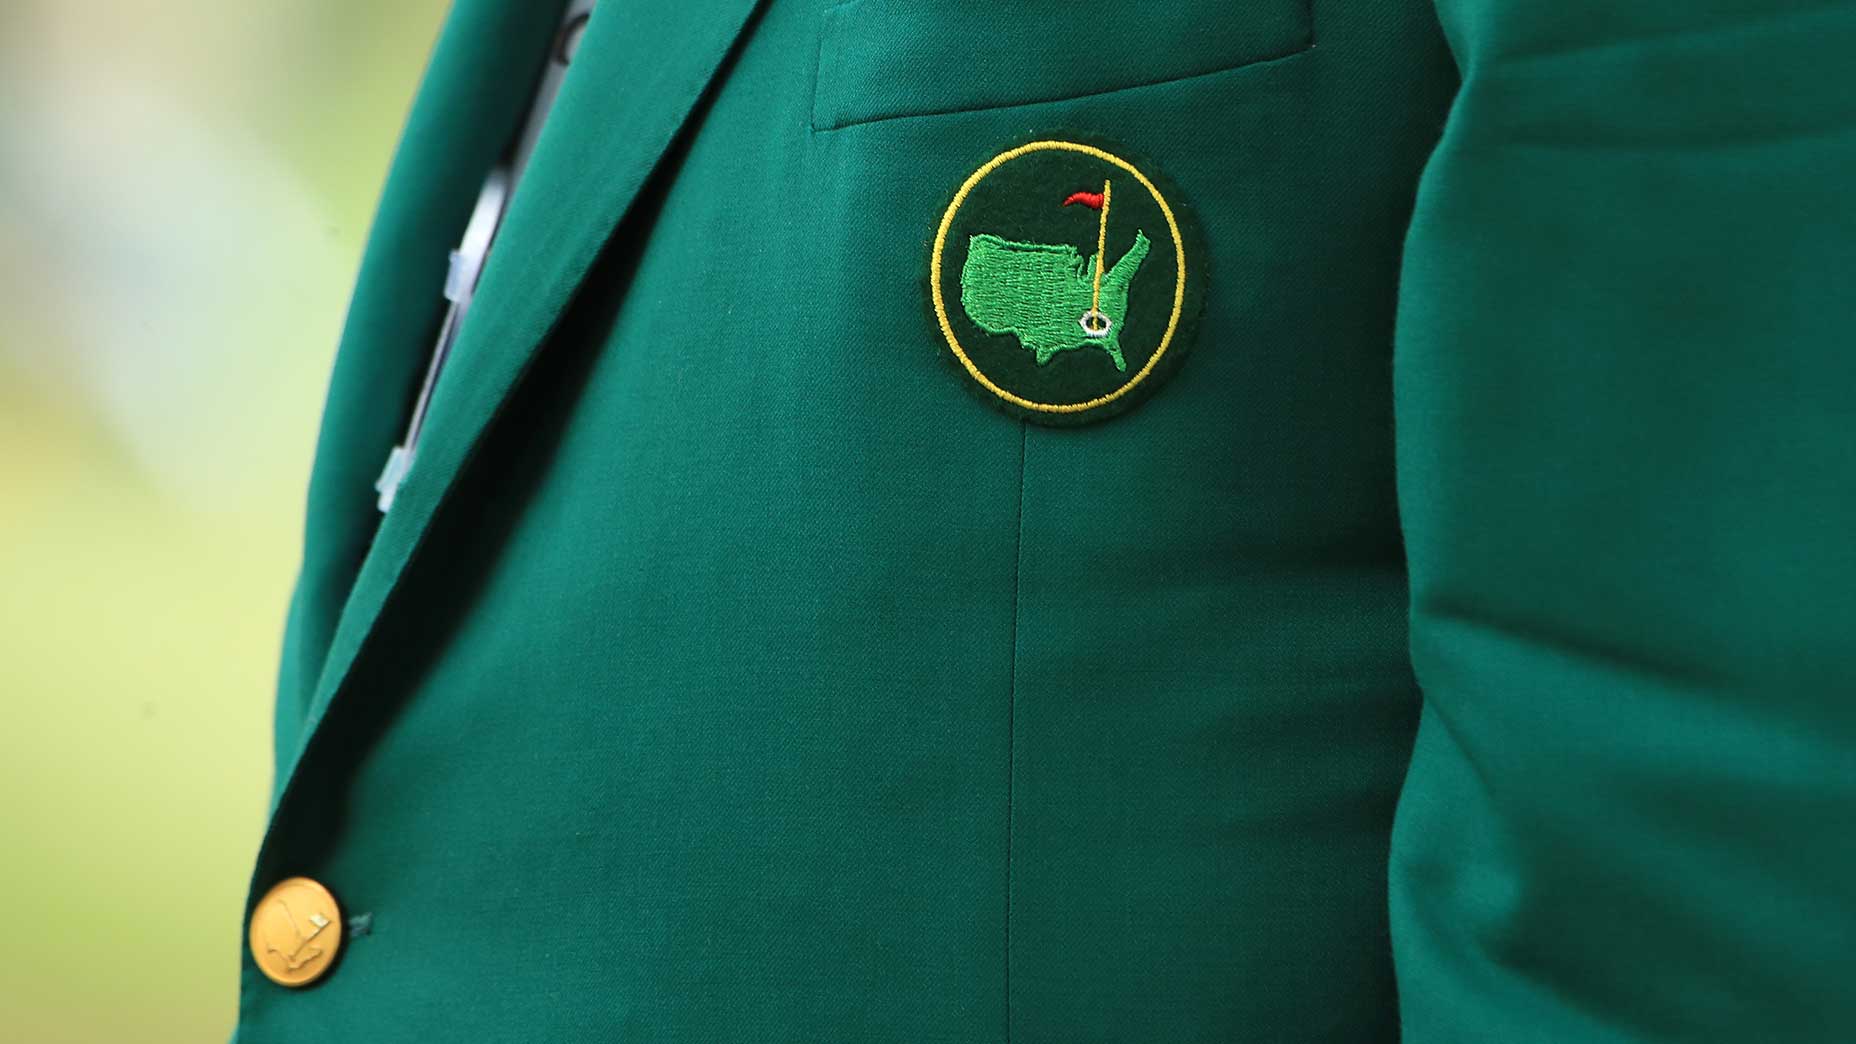 Secrets of the Masters green jacket only winners know about BVM Sports